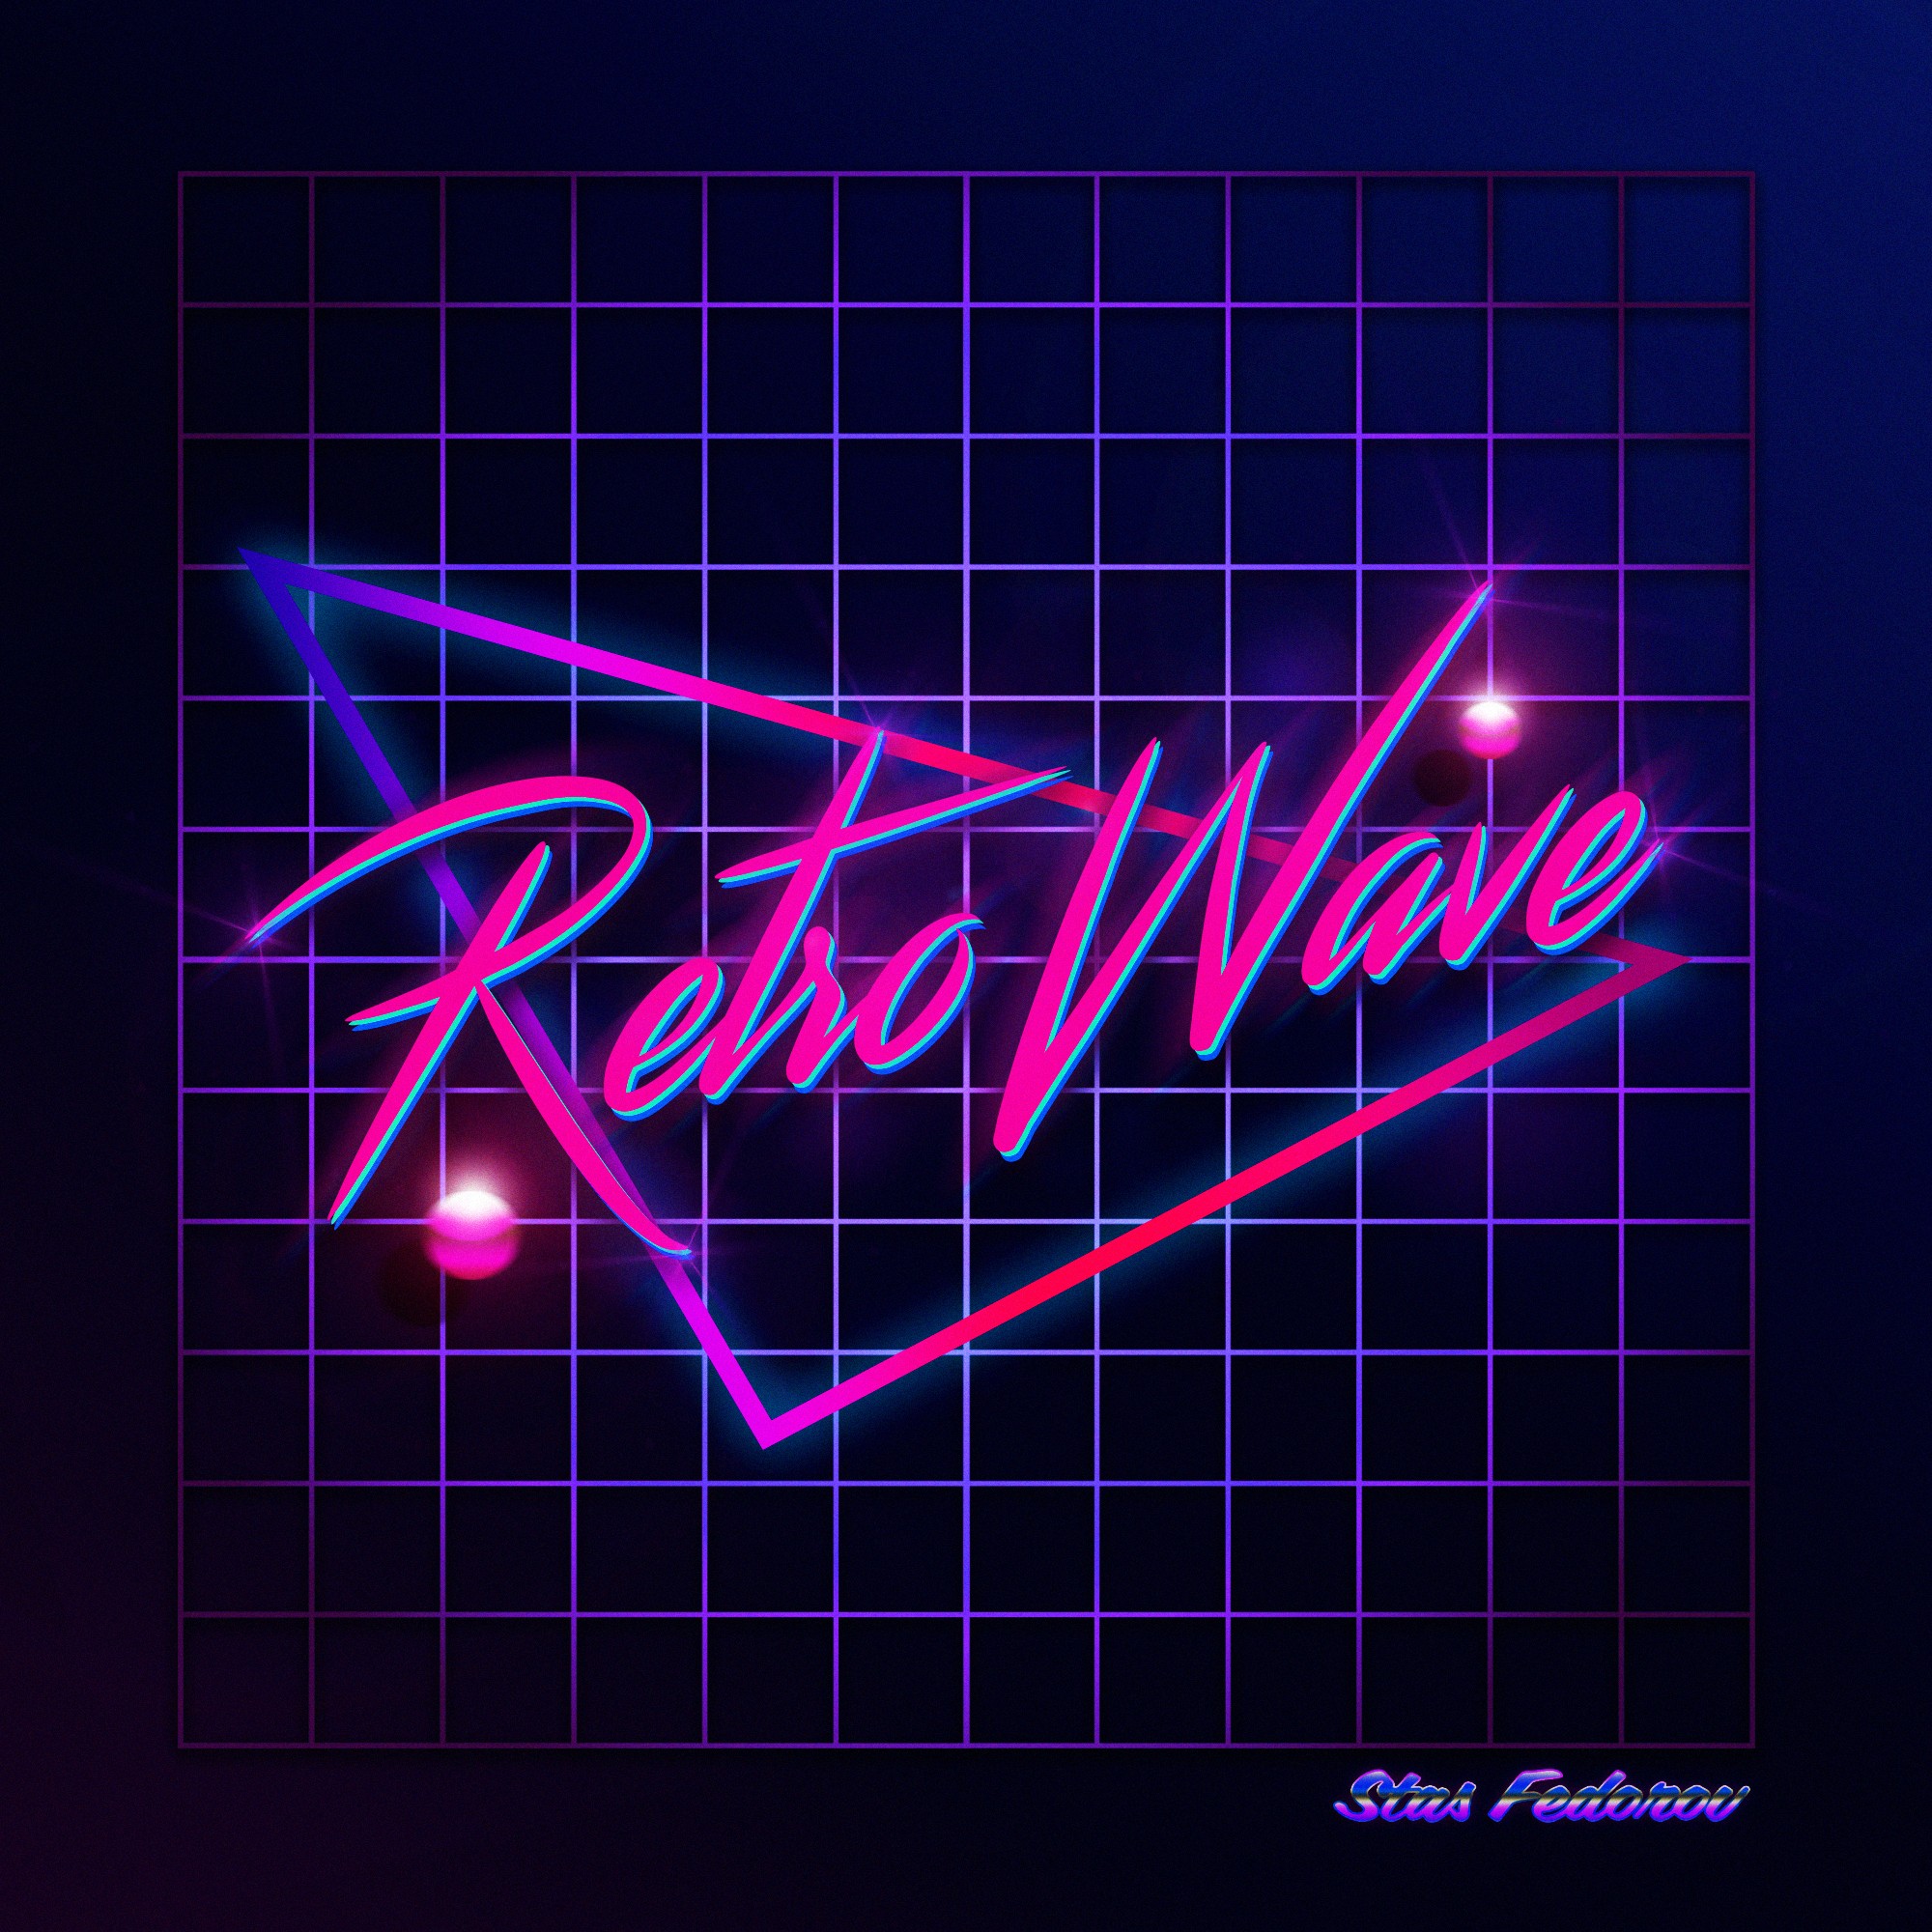 New Retro Wave, Synthwave, Neon, 1980s, Typography, Photoshop Wallpaper